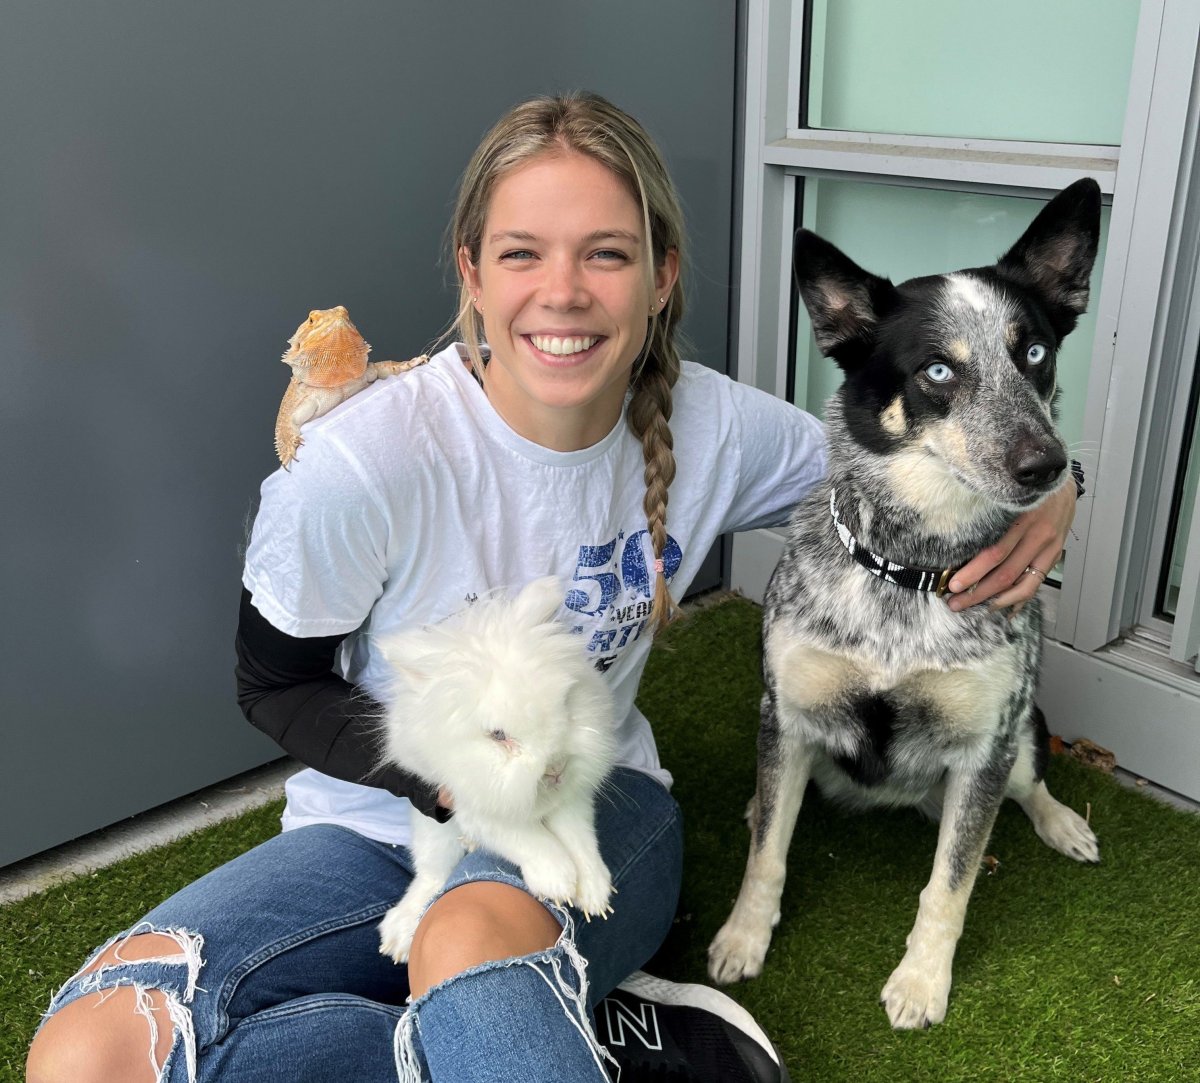 Summer Nickerson-Hagen with Kawartha Downs with some furry friends. Kawartha Downs has donated $25,000 to the Peterborough Humane Society's new animal care centre.